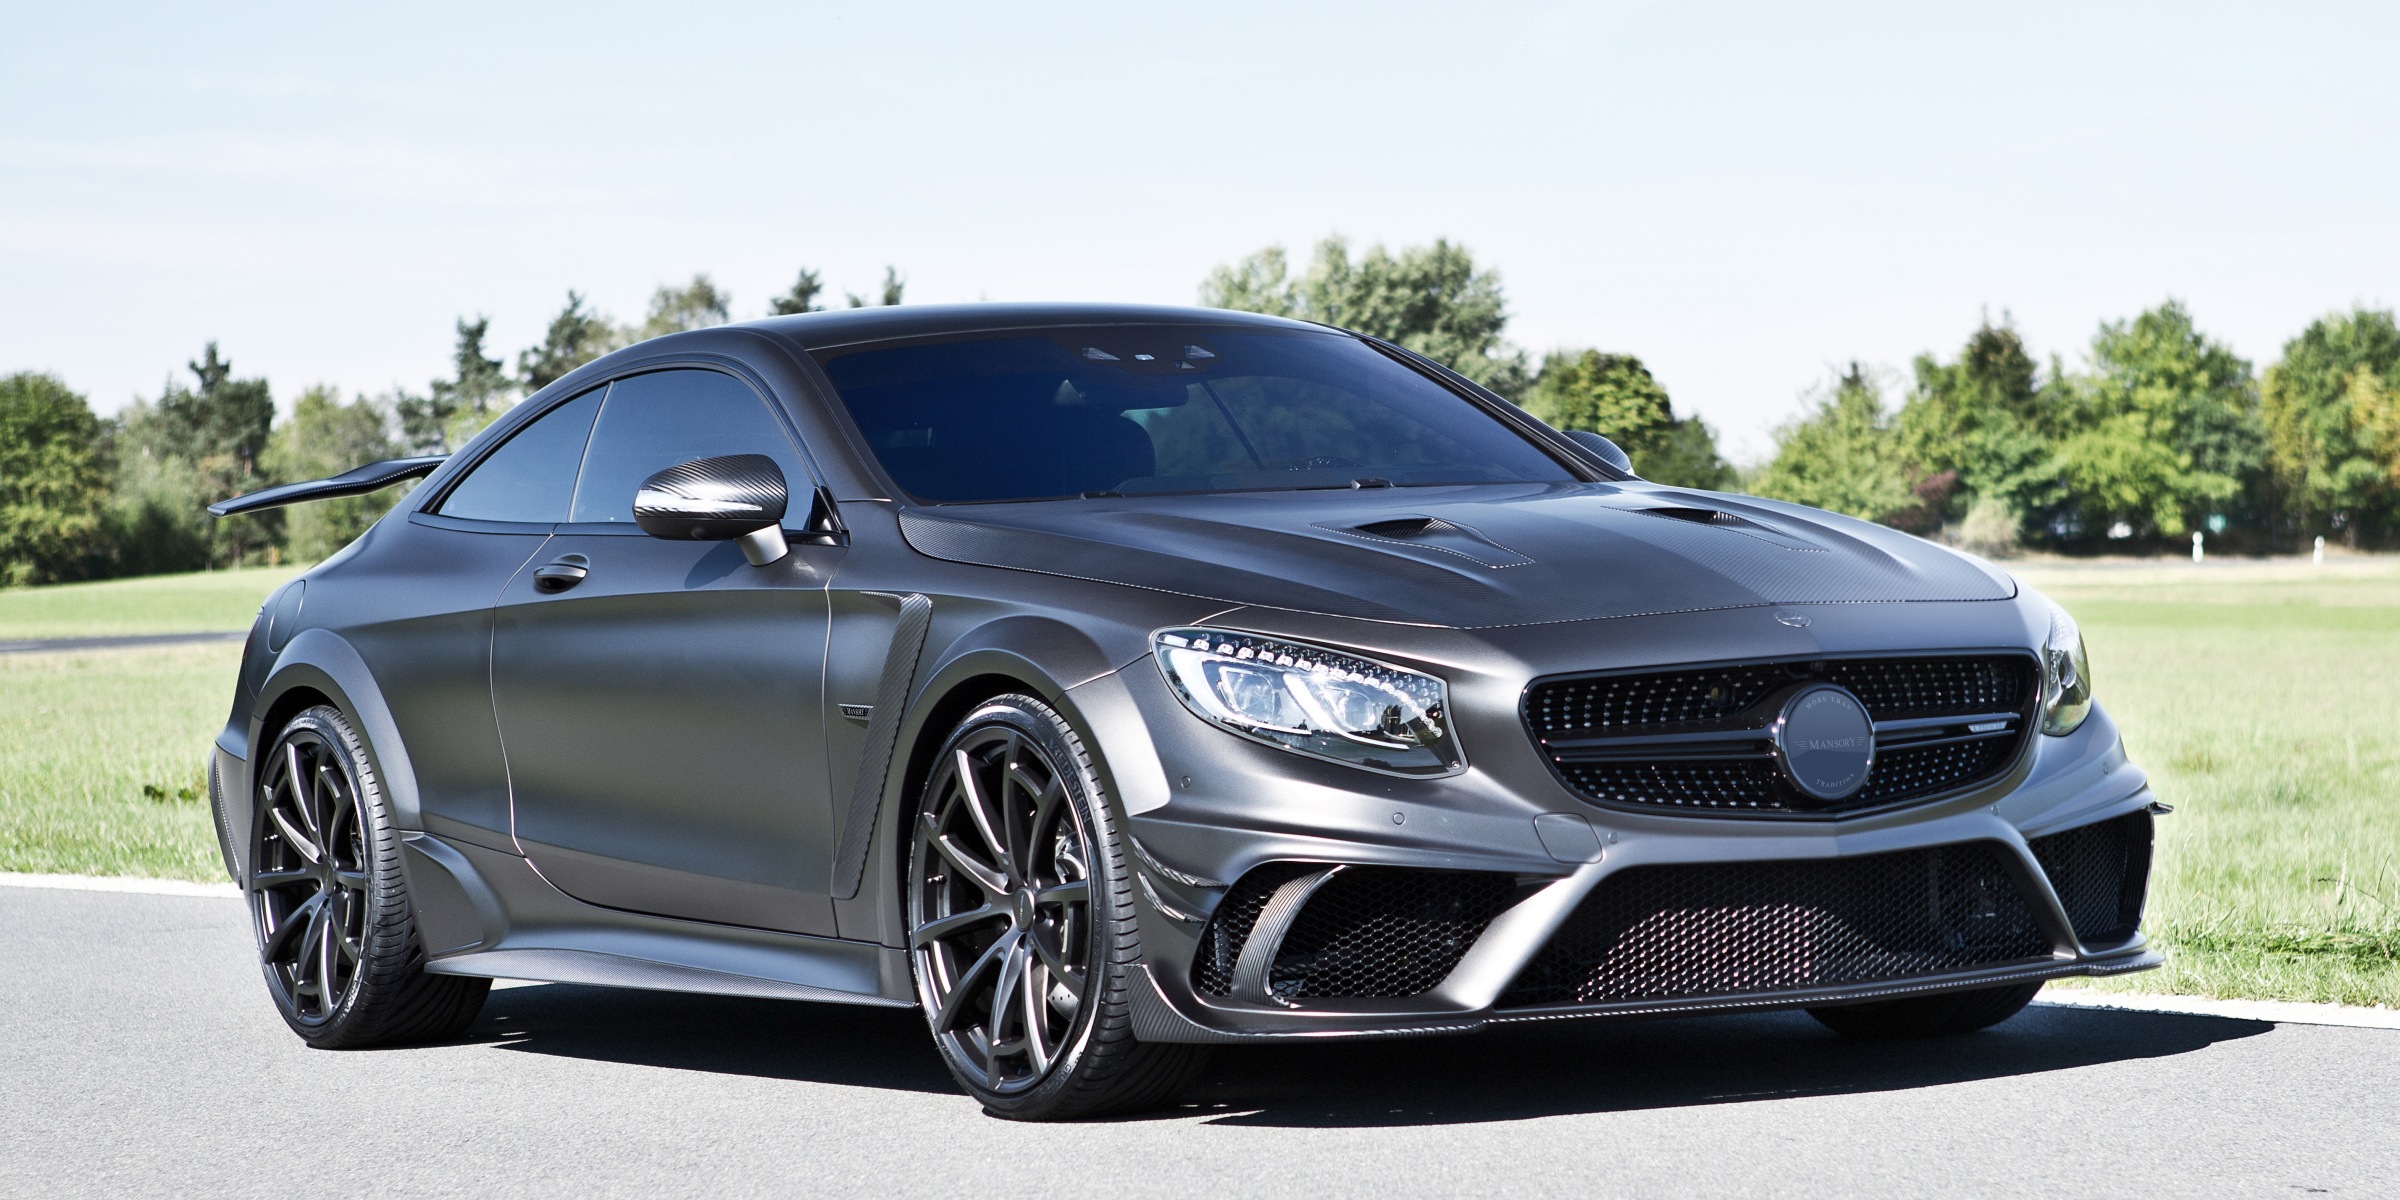 mansory_mercedes-benz_s-coupe_wide_black_edition_01.jpg